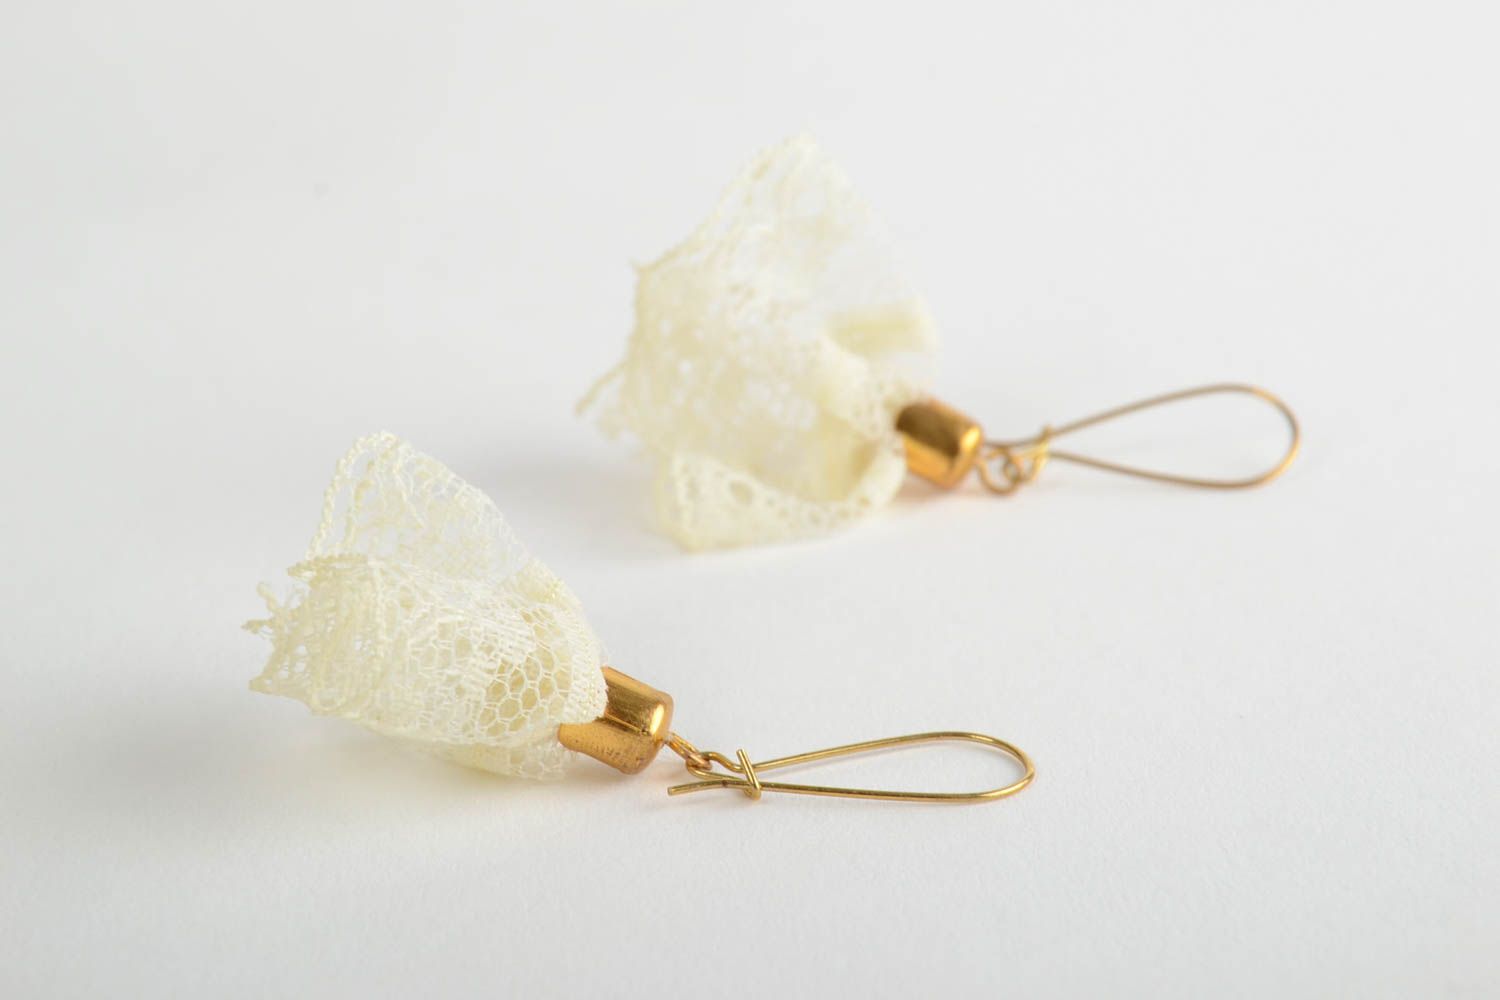 Handmade light festive lace dangling earrings with golden colored ear wires photo 5